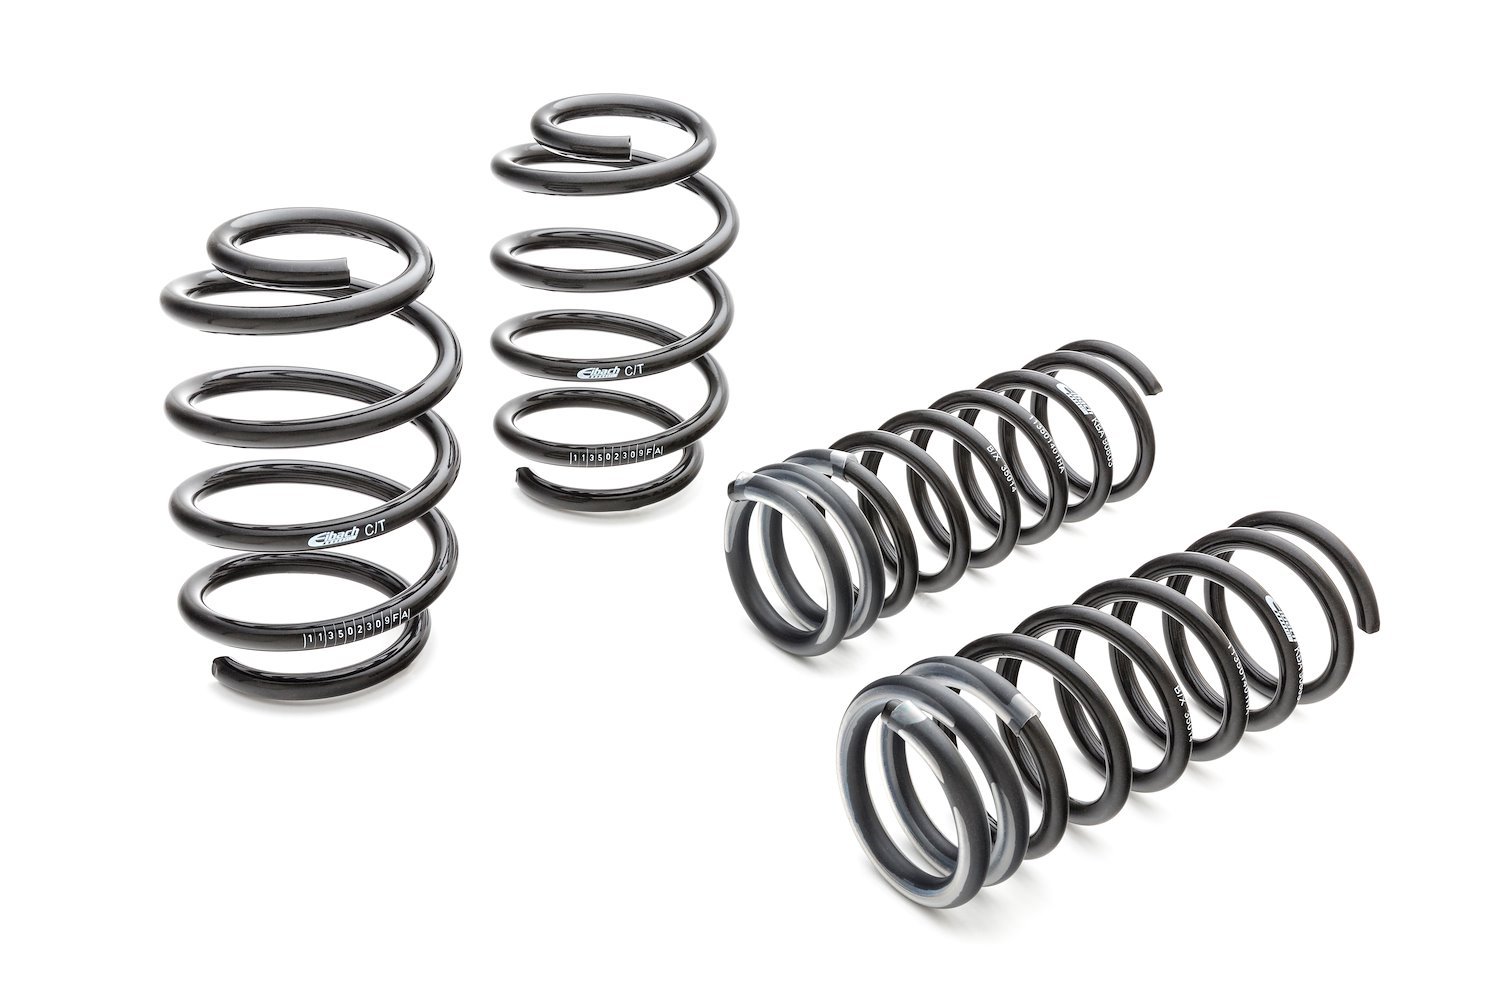 3518.140 Pro-Kit Lowering Springs 1979-1993 Mustang 4/6-cyl Coupe - 1.200 in. Front/1 in. Rear Drop